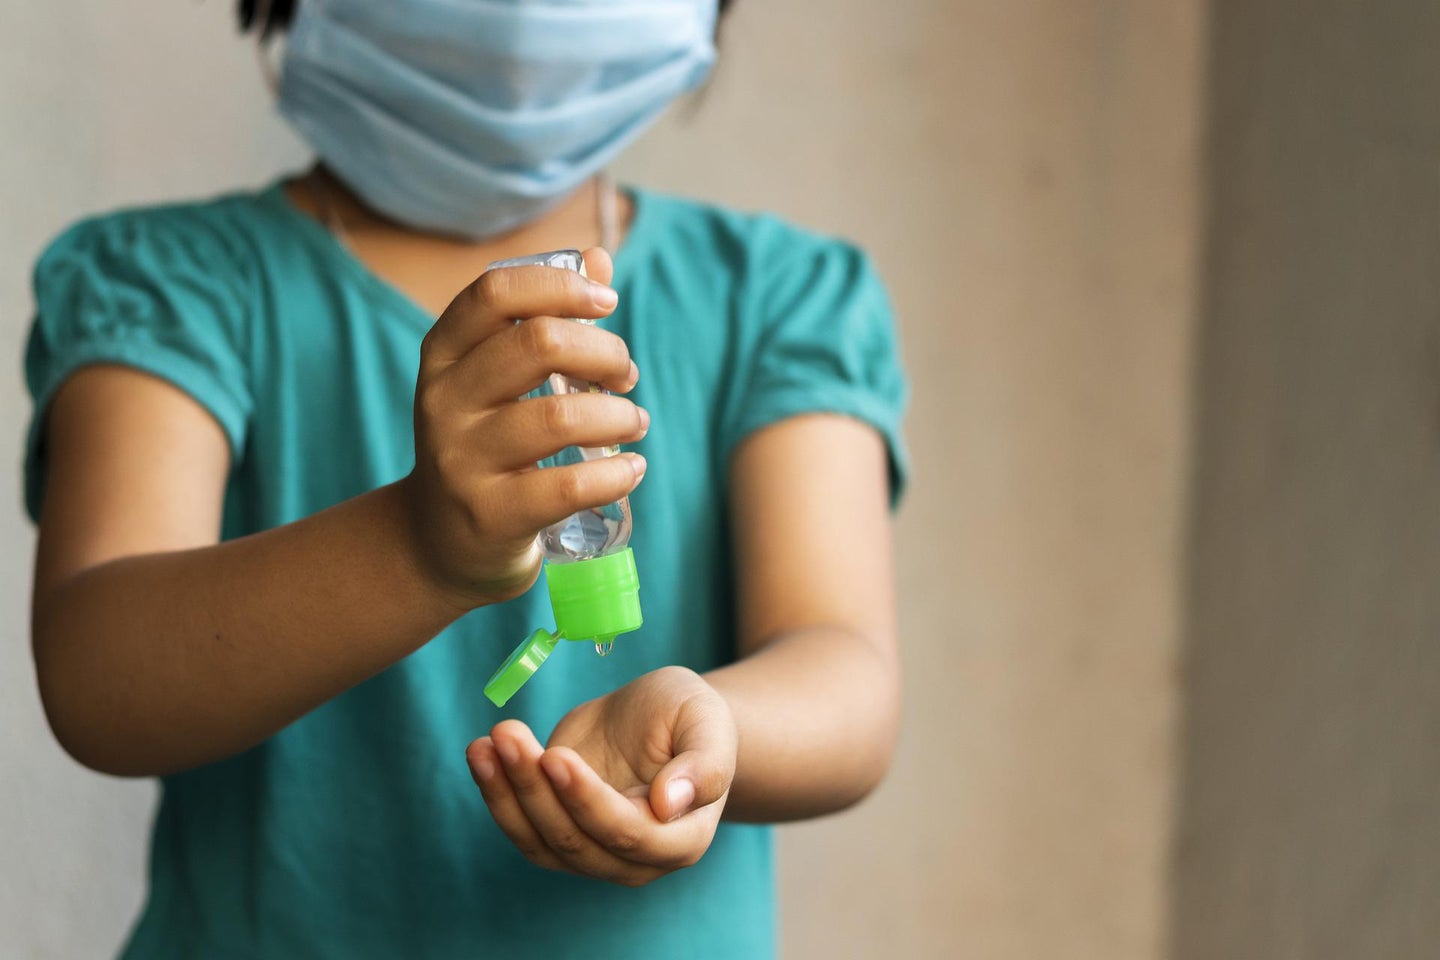 A child wears a mask and sanitizes hands to avoid getting sick.